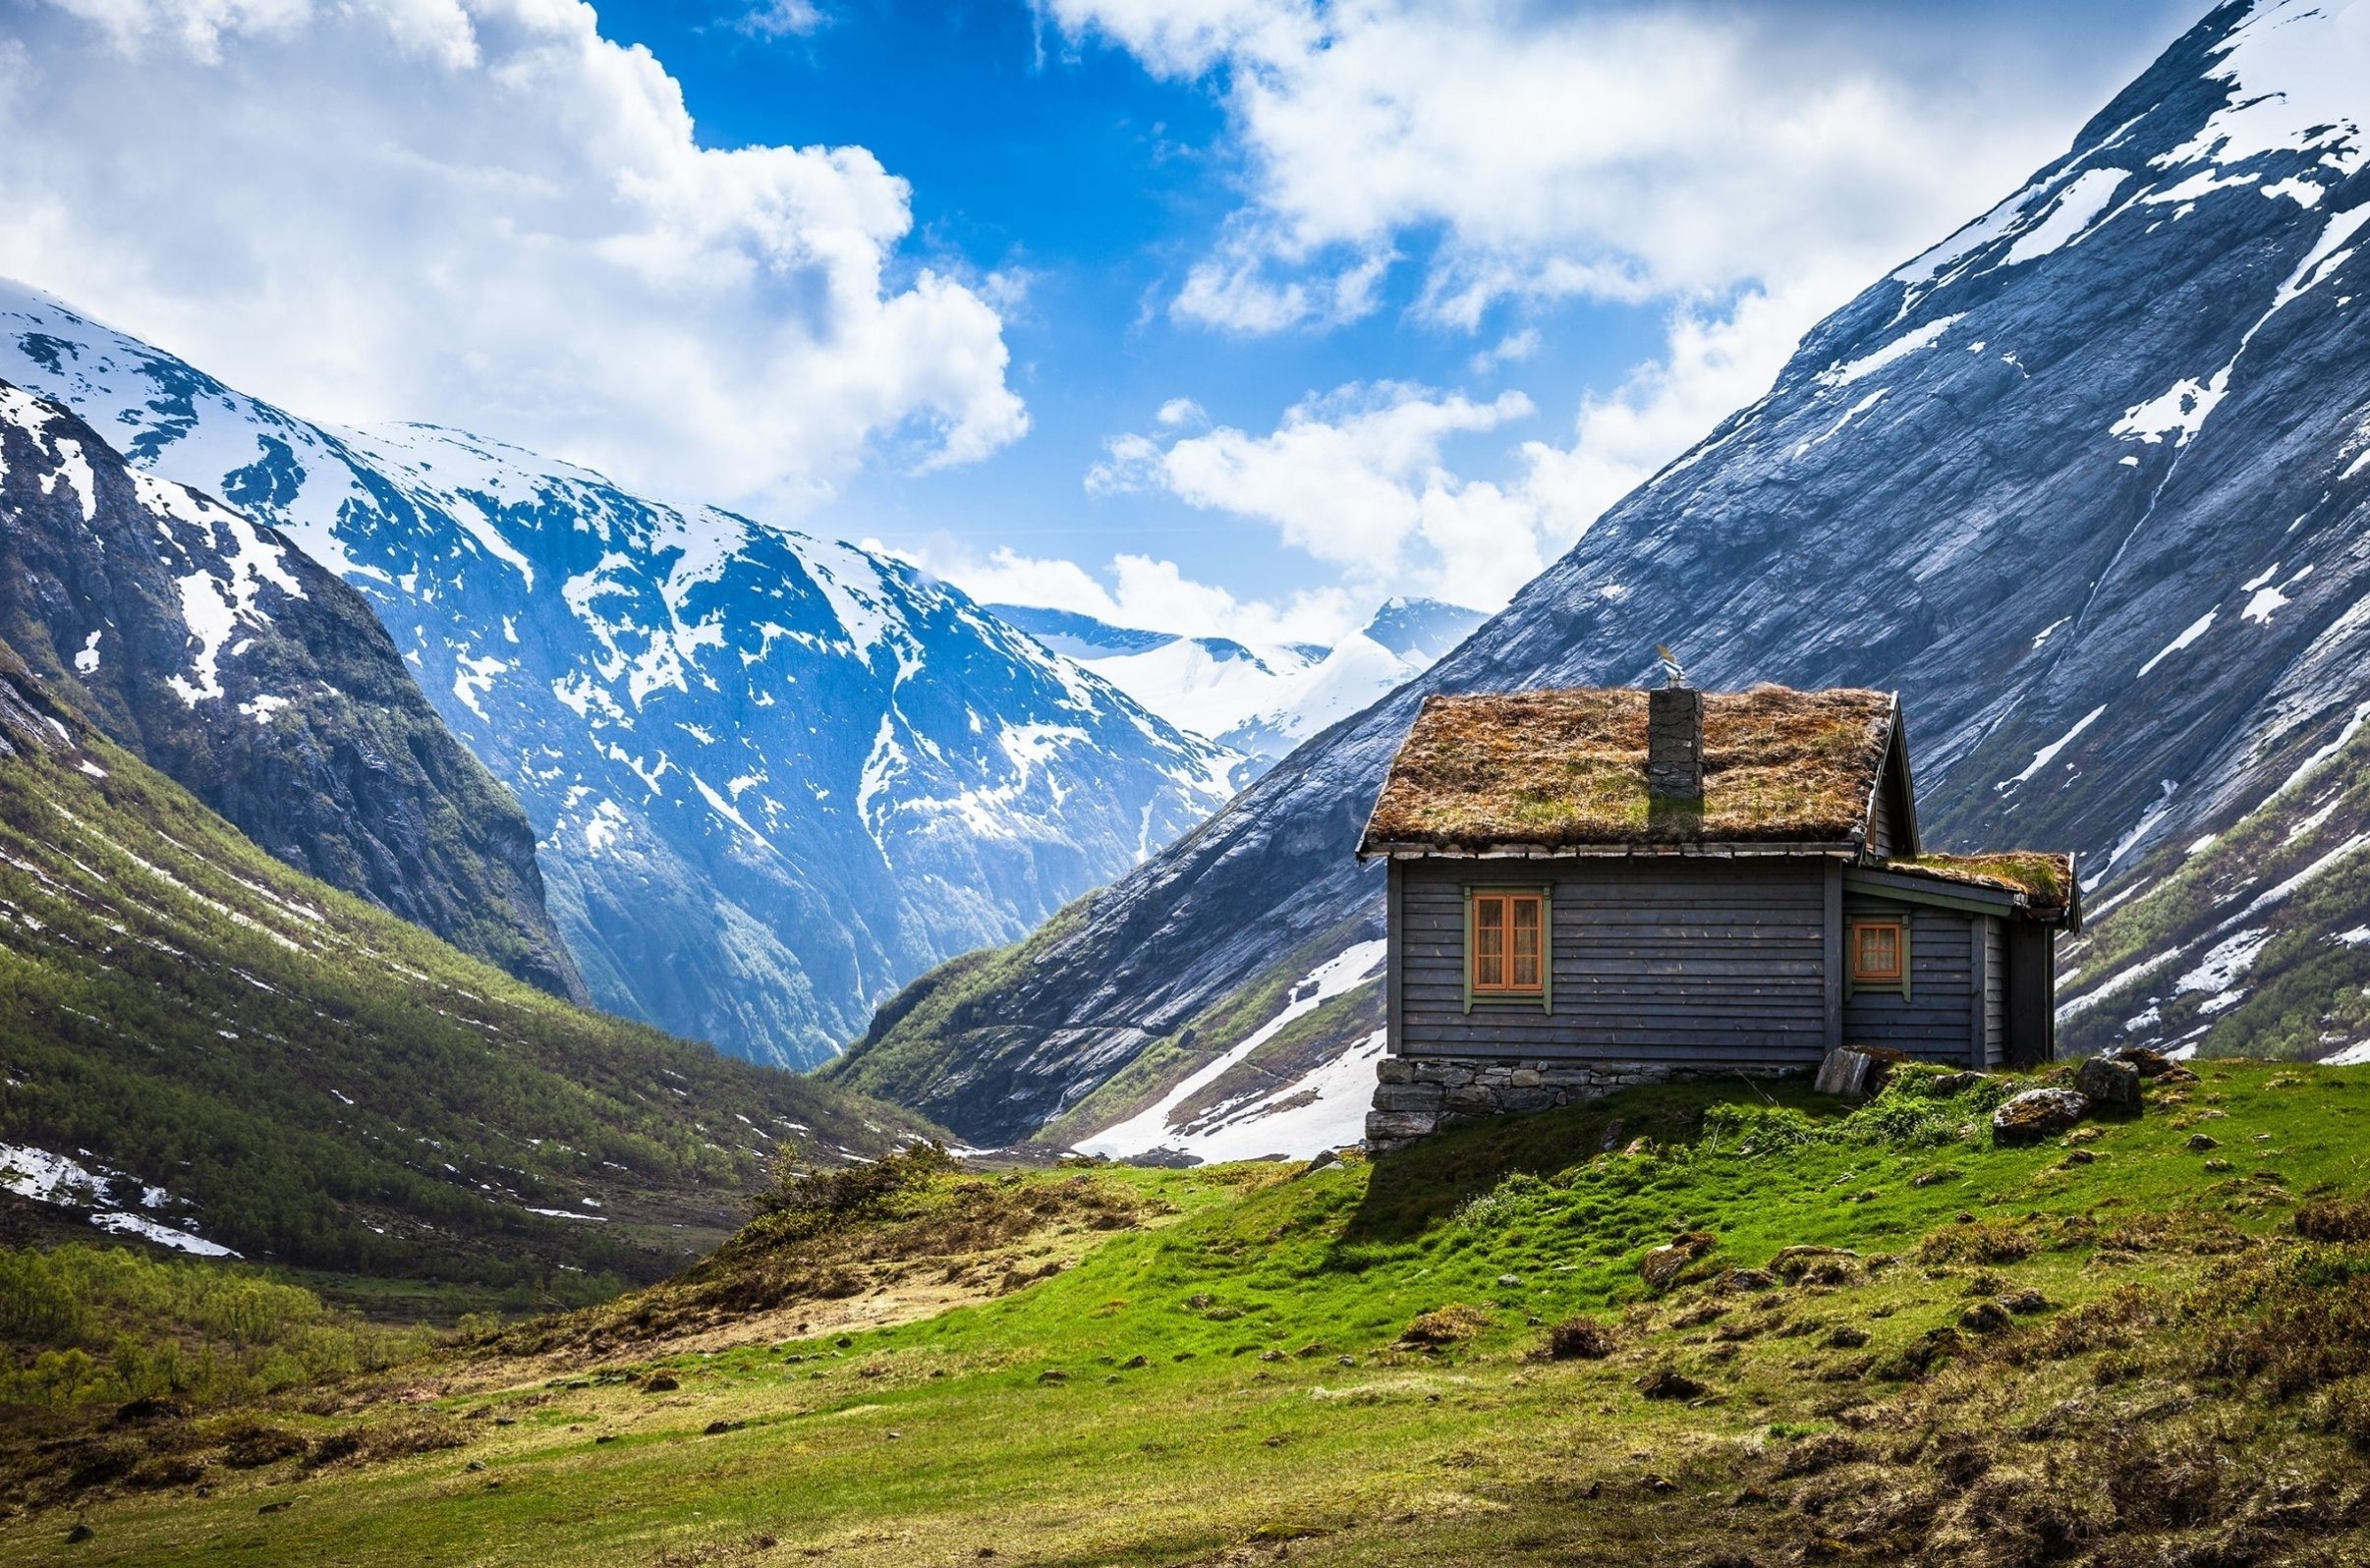 Download 2412x1596 House, Mountains, Clouds, Field, Cabin Wallpaper